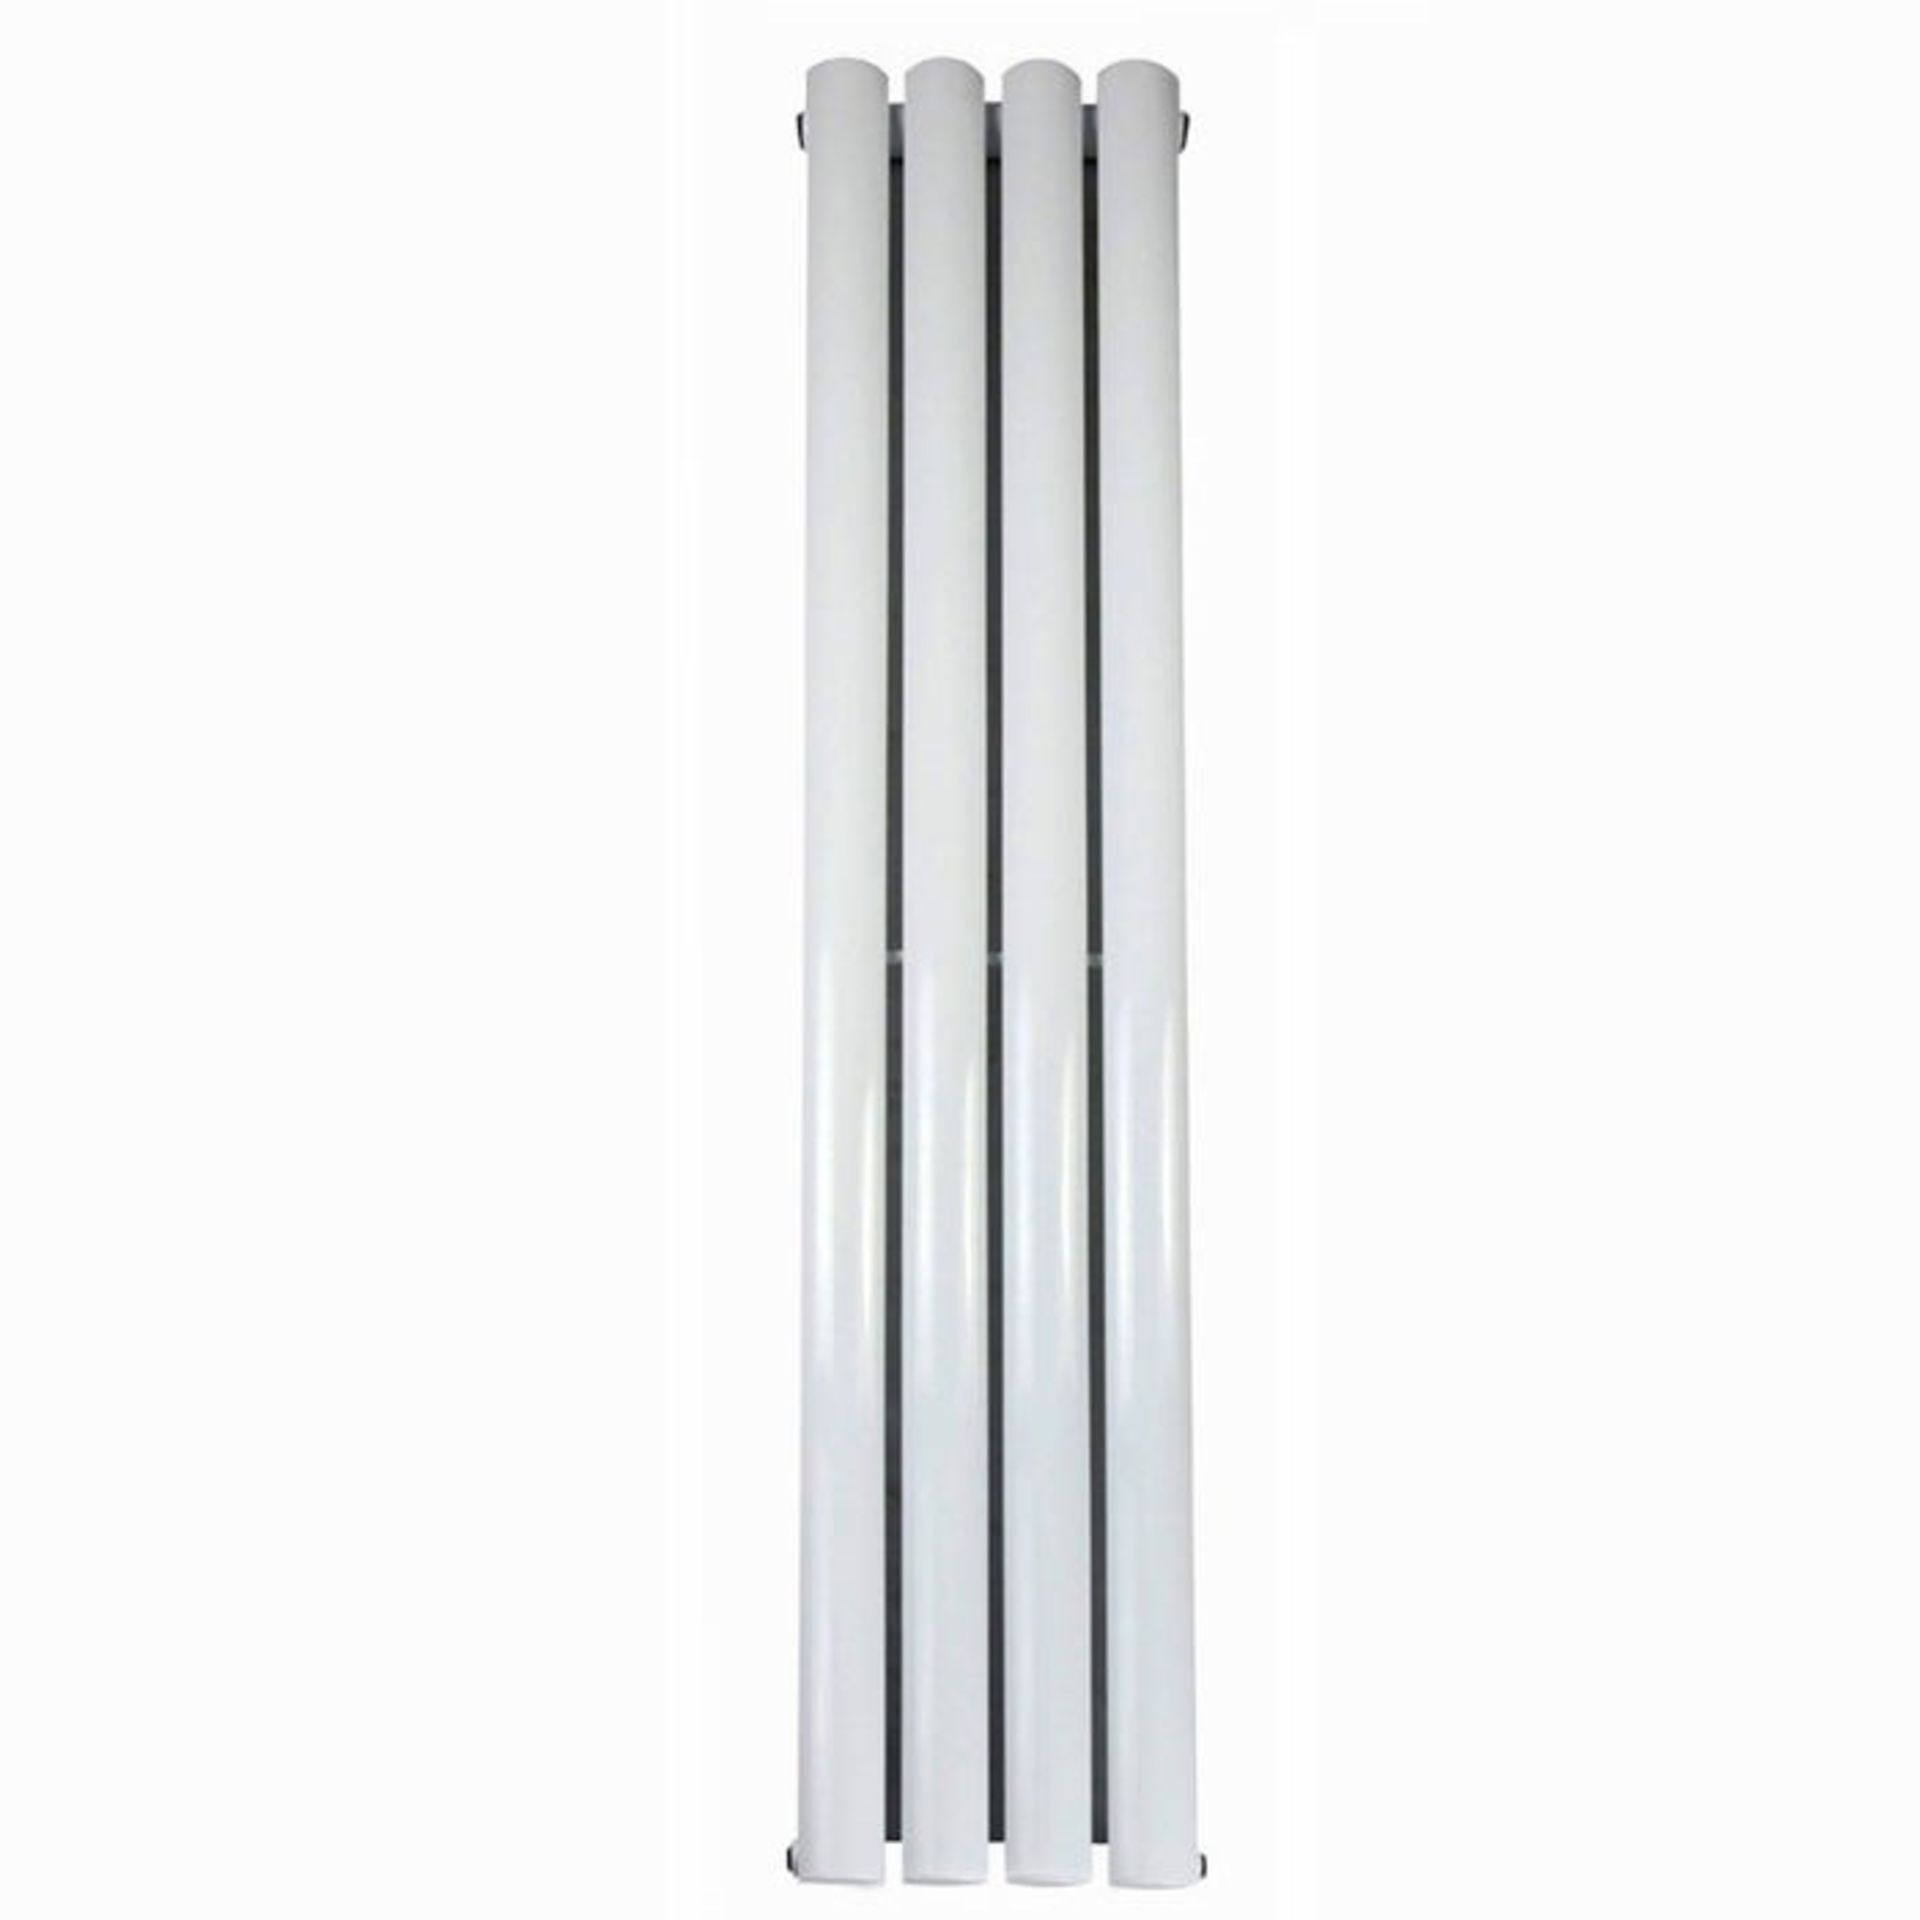 1600x240mm Gloss White Single Oval Tube Vertical Radiator. RRP £274.99.Made from high quality ... - Image 3 of 3